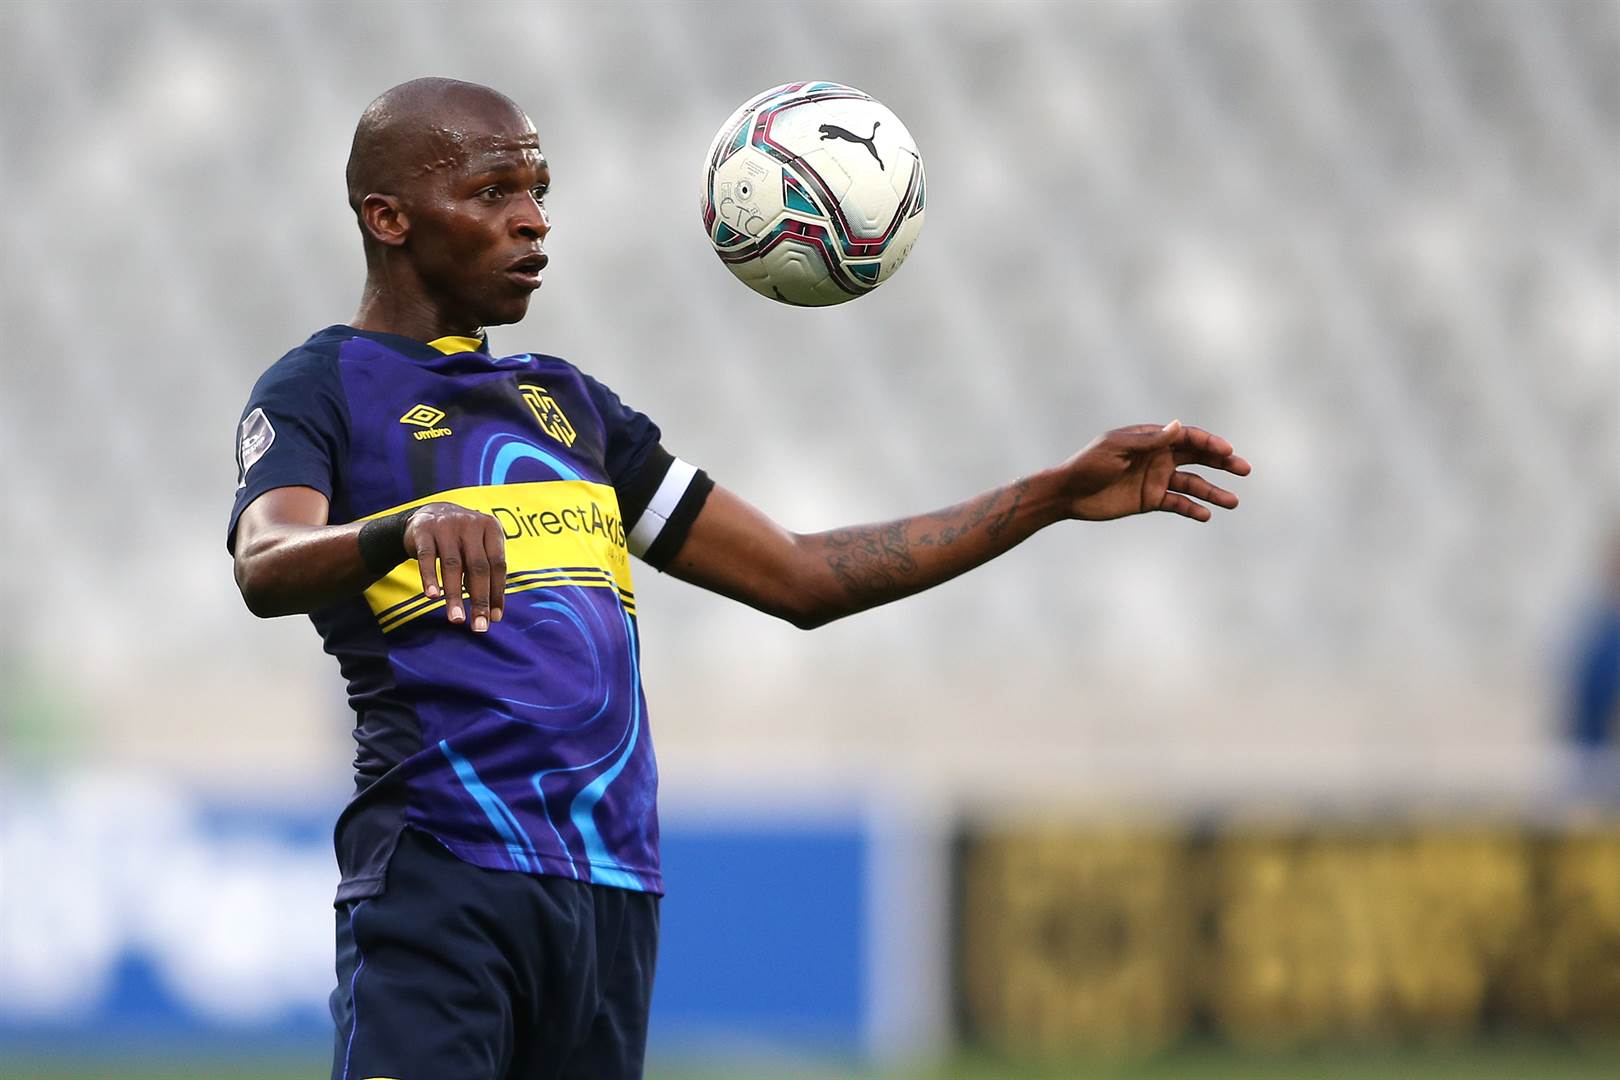 Thamsanqa Mkhize (Cape Town City) – 33 years, 0 mo